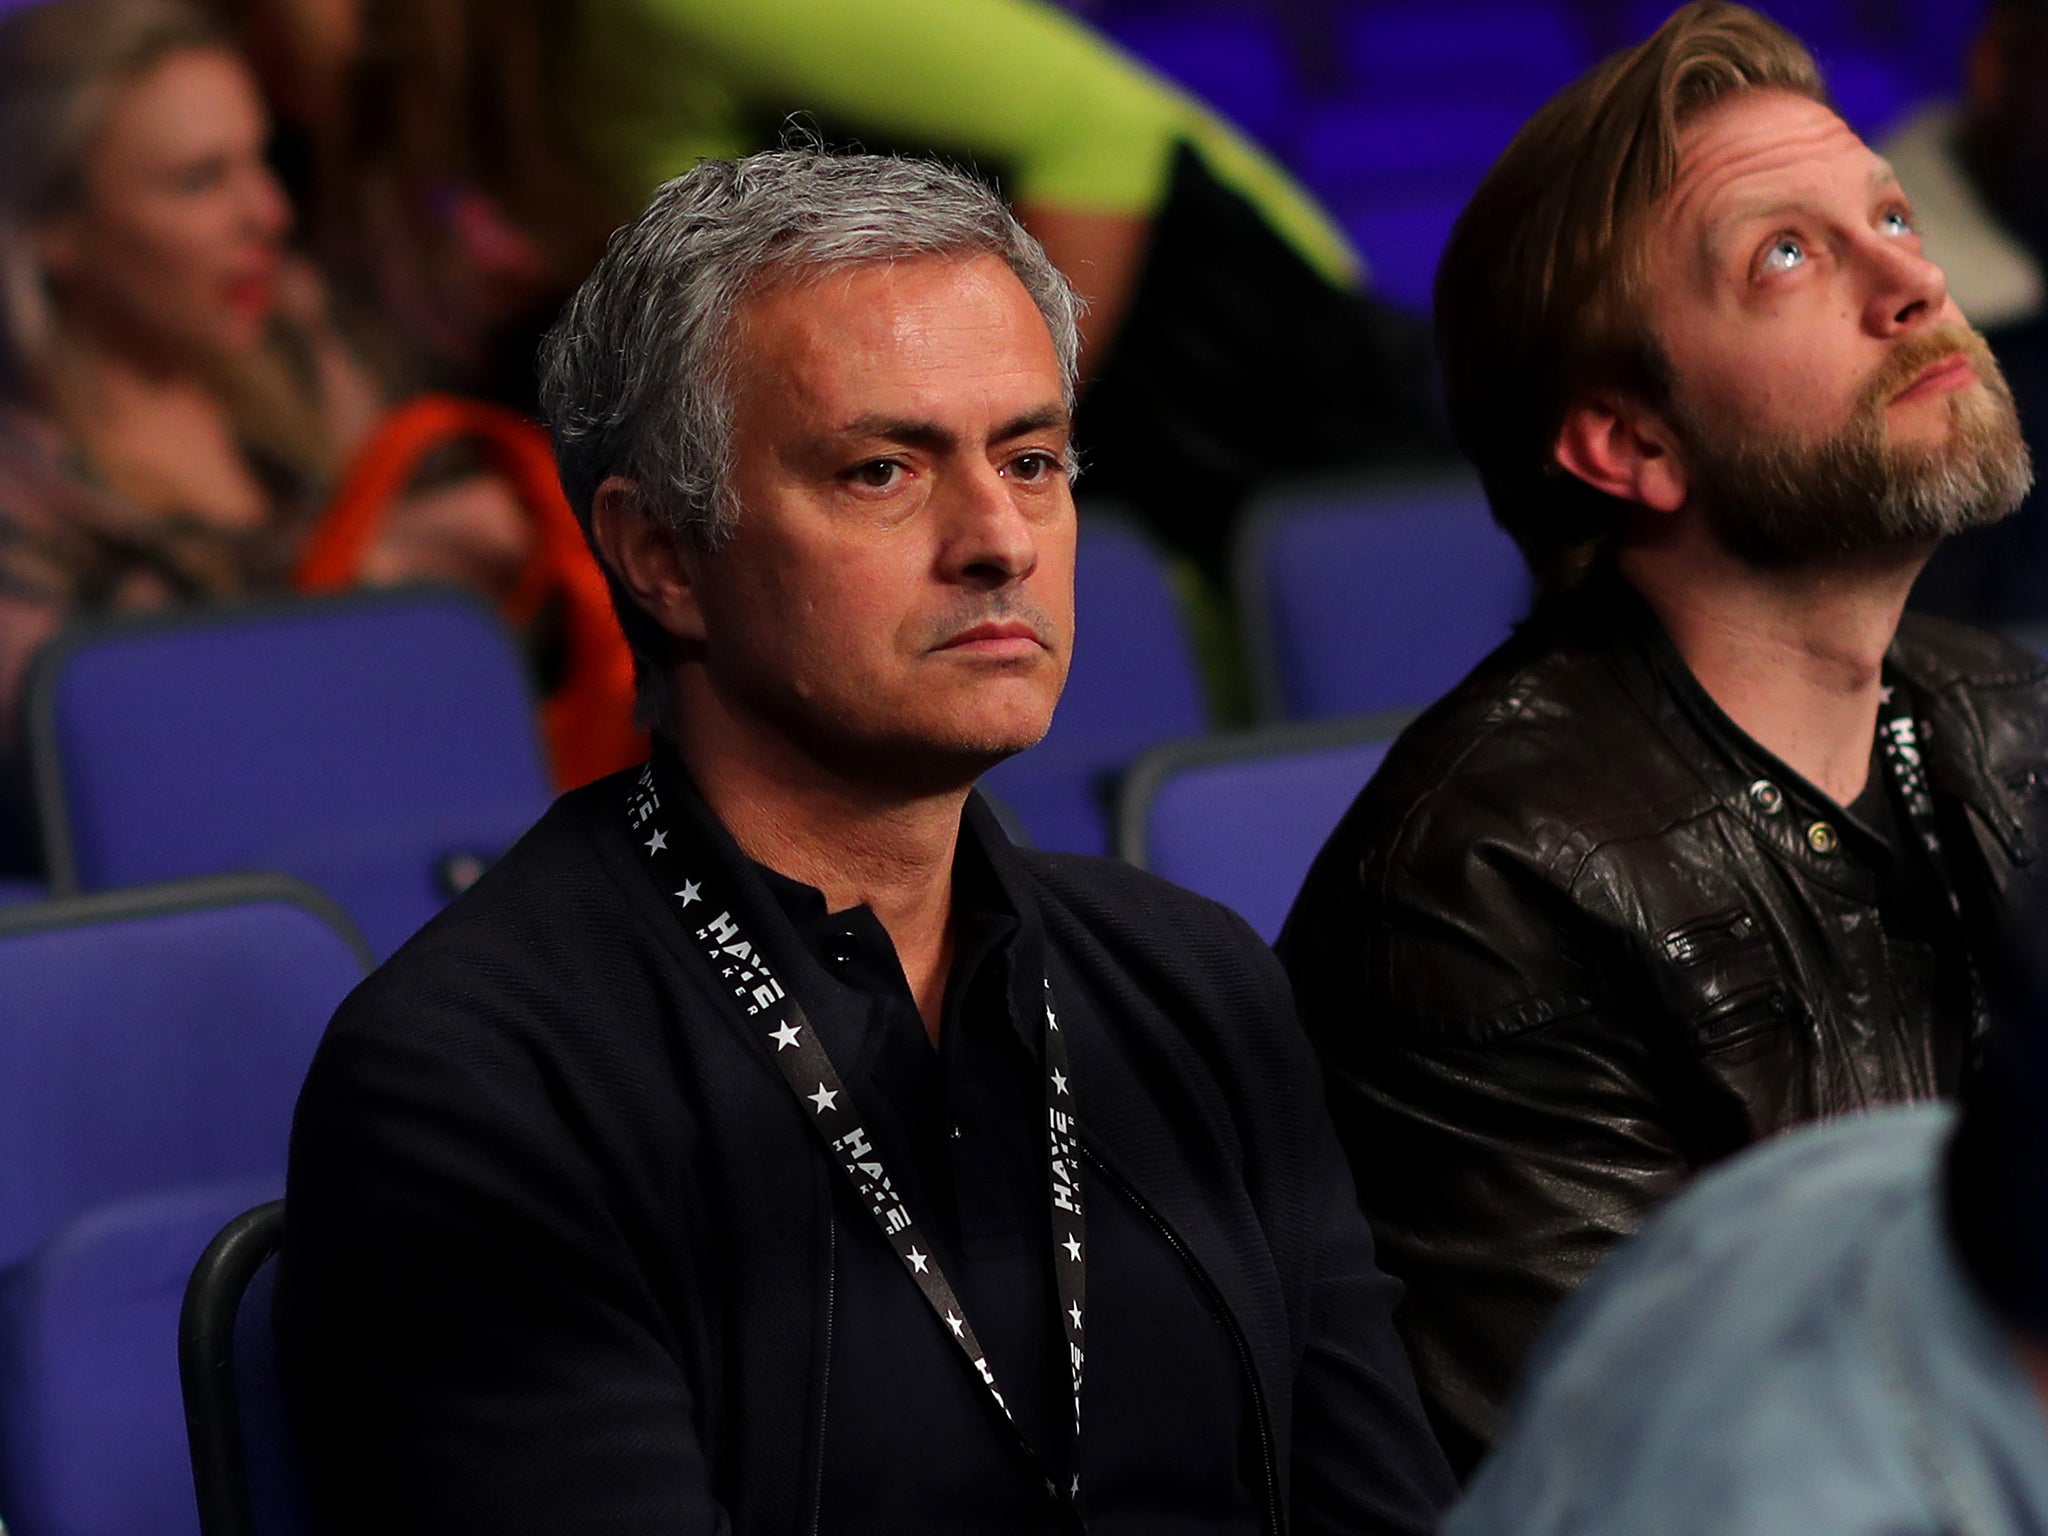 Jose Mourinho pictured at the David Haye fight in London on Saturday night